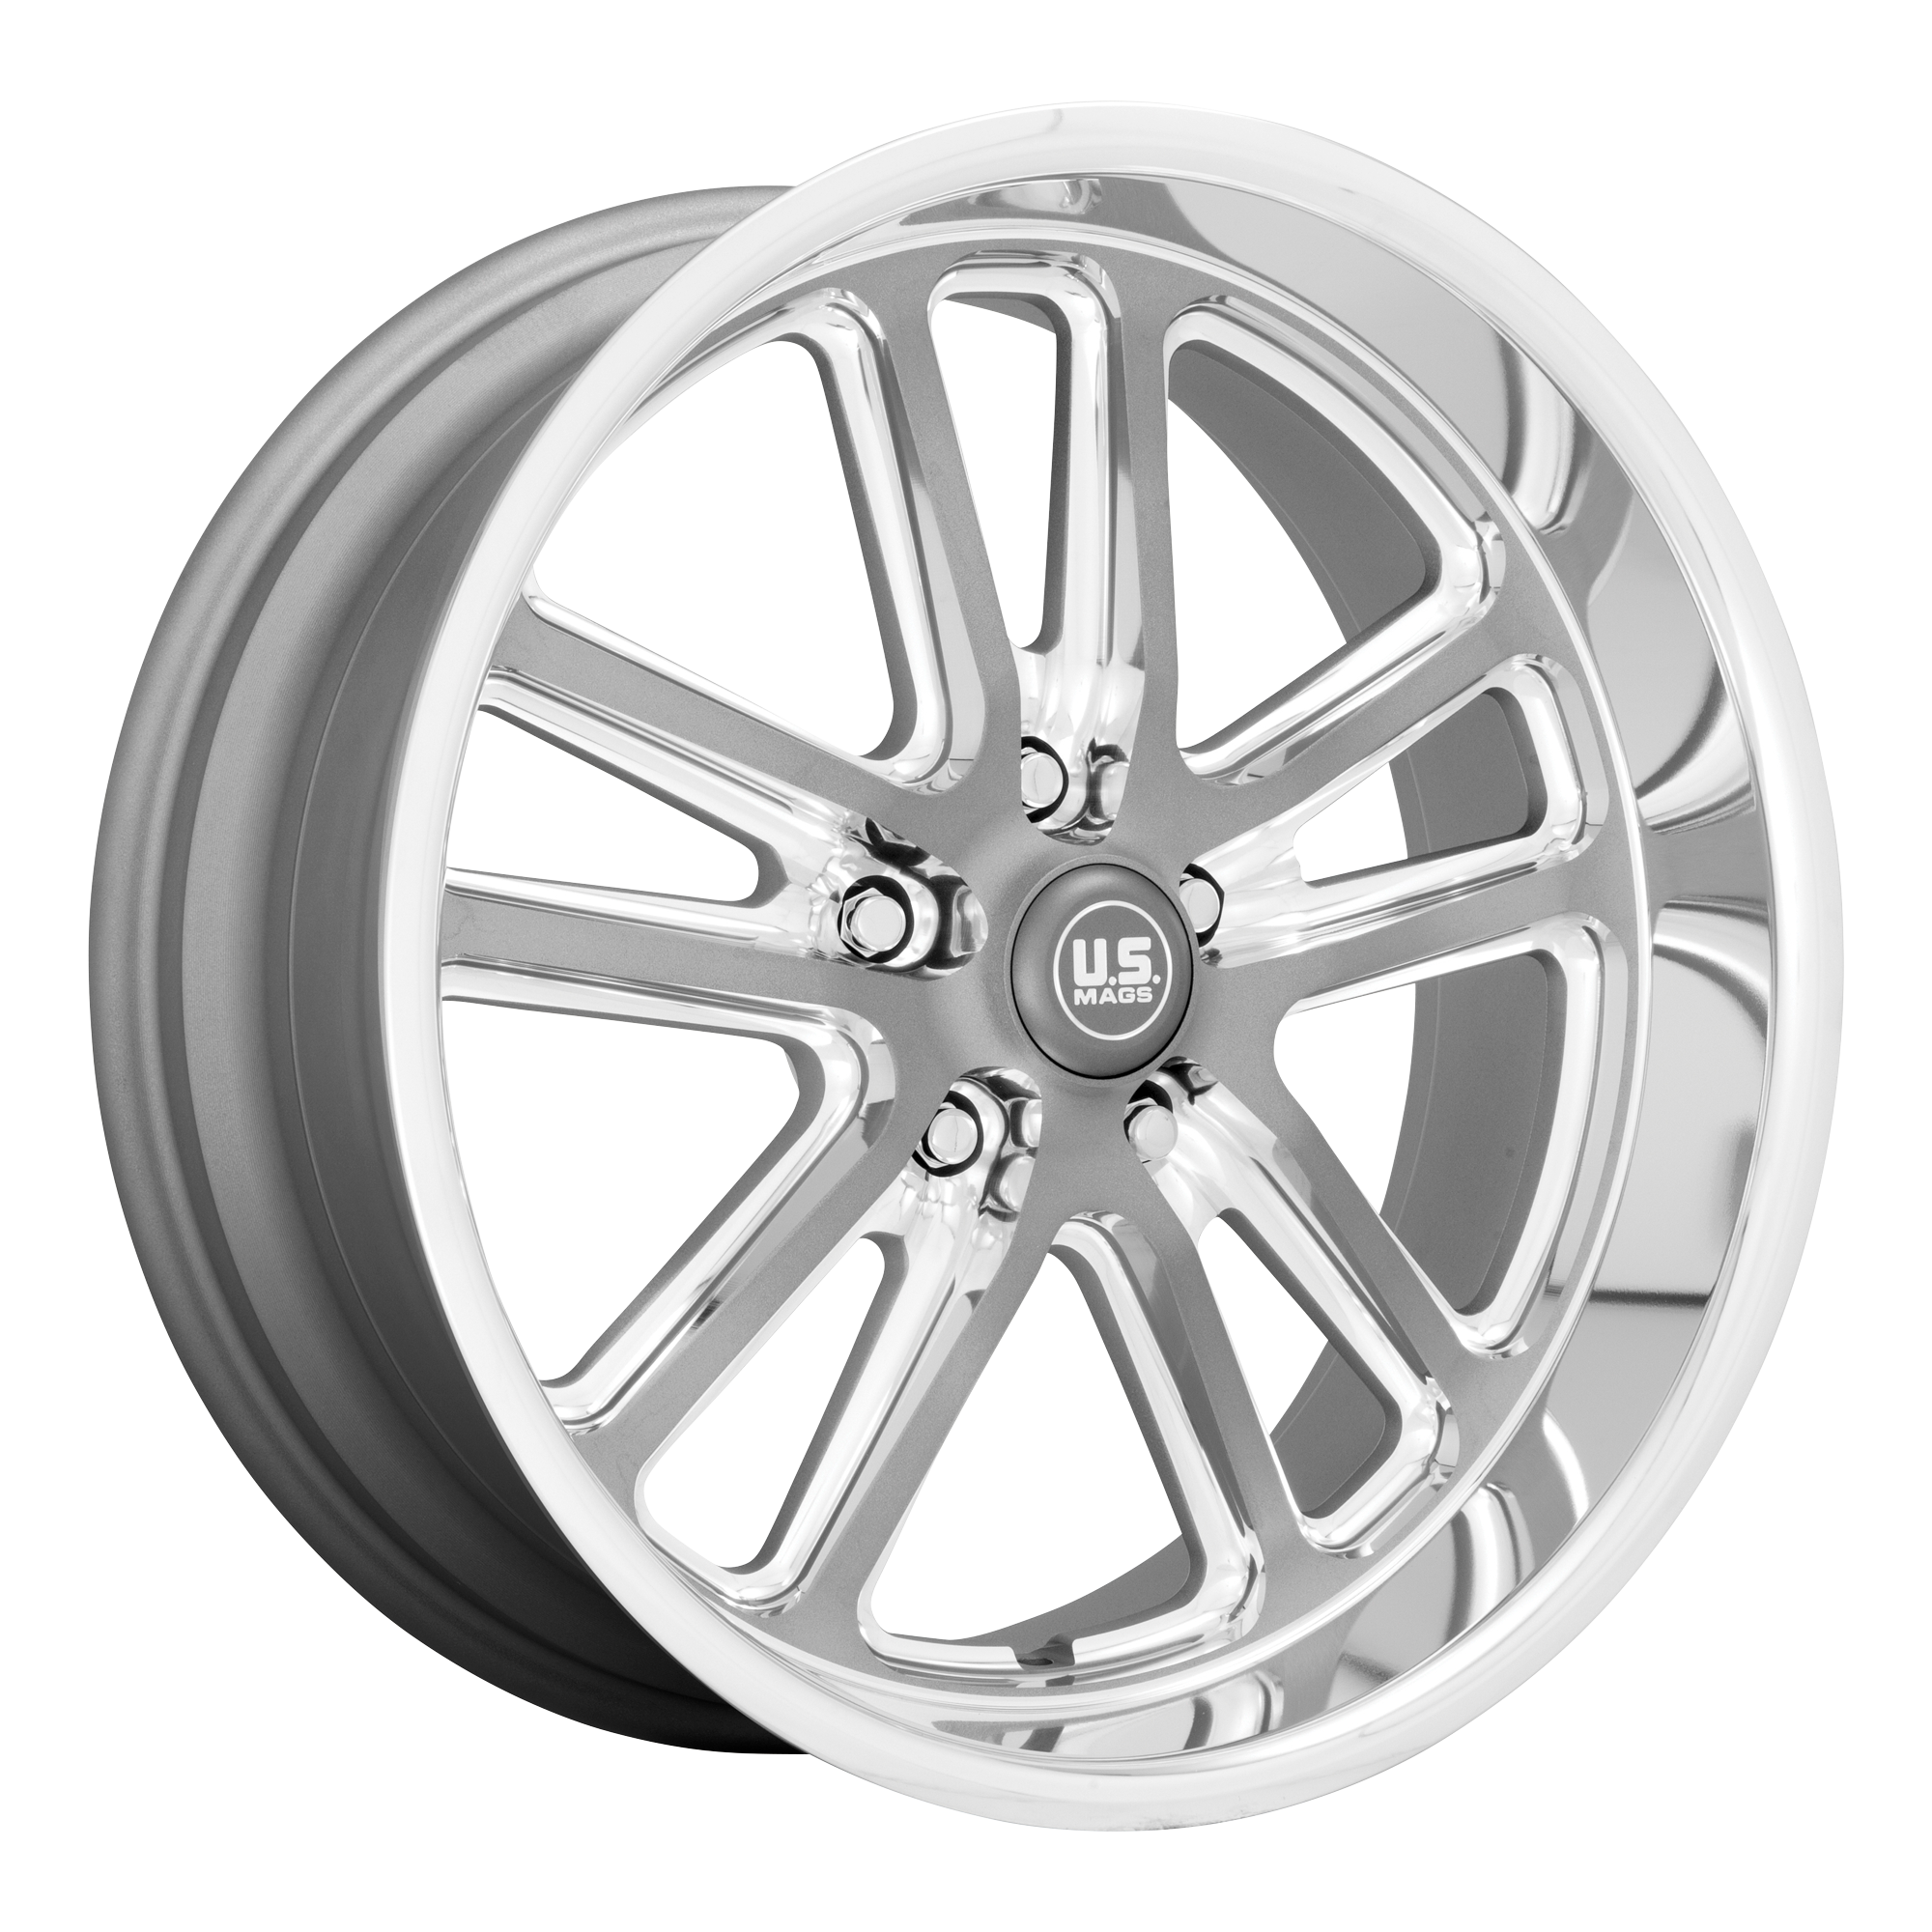 BULLET 20x8 5x120.65 TEXTURED GUN METAL W/ MILLED EDGES (1 mm) - Tires and Engine Performance